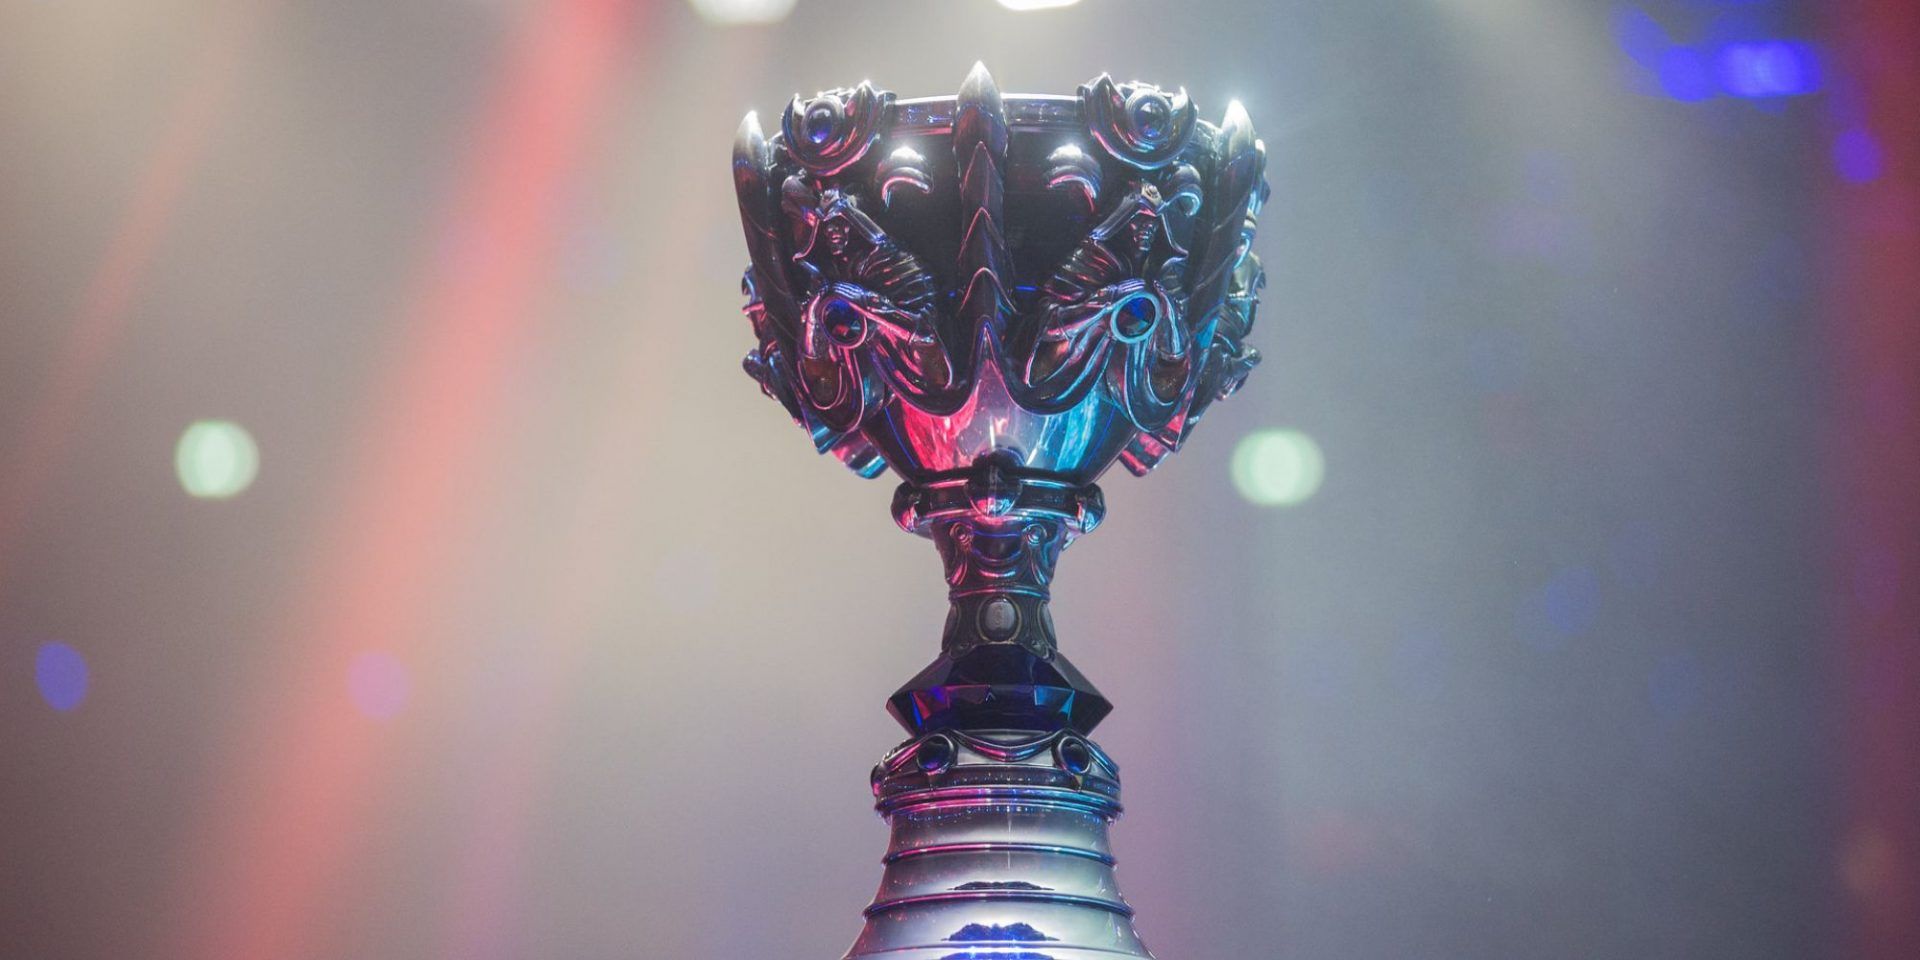 The Summoner's Cup from the League of Legends World Championship